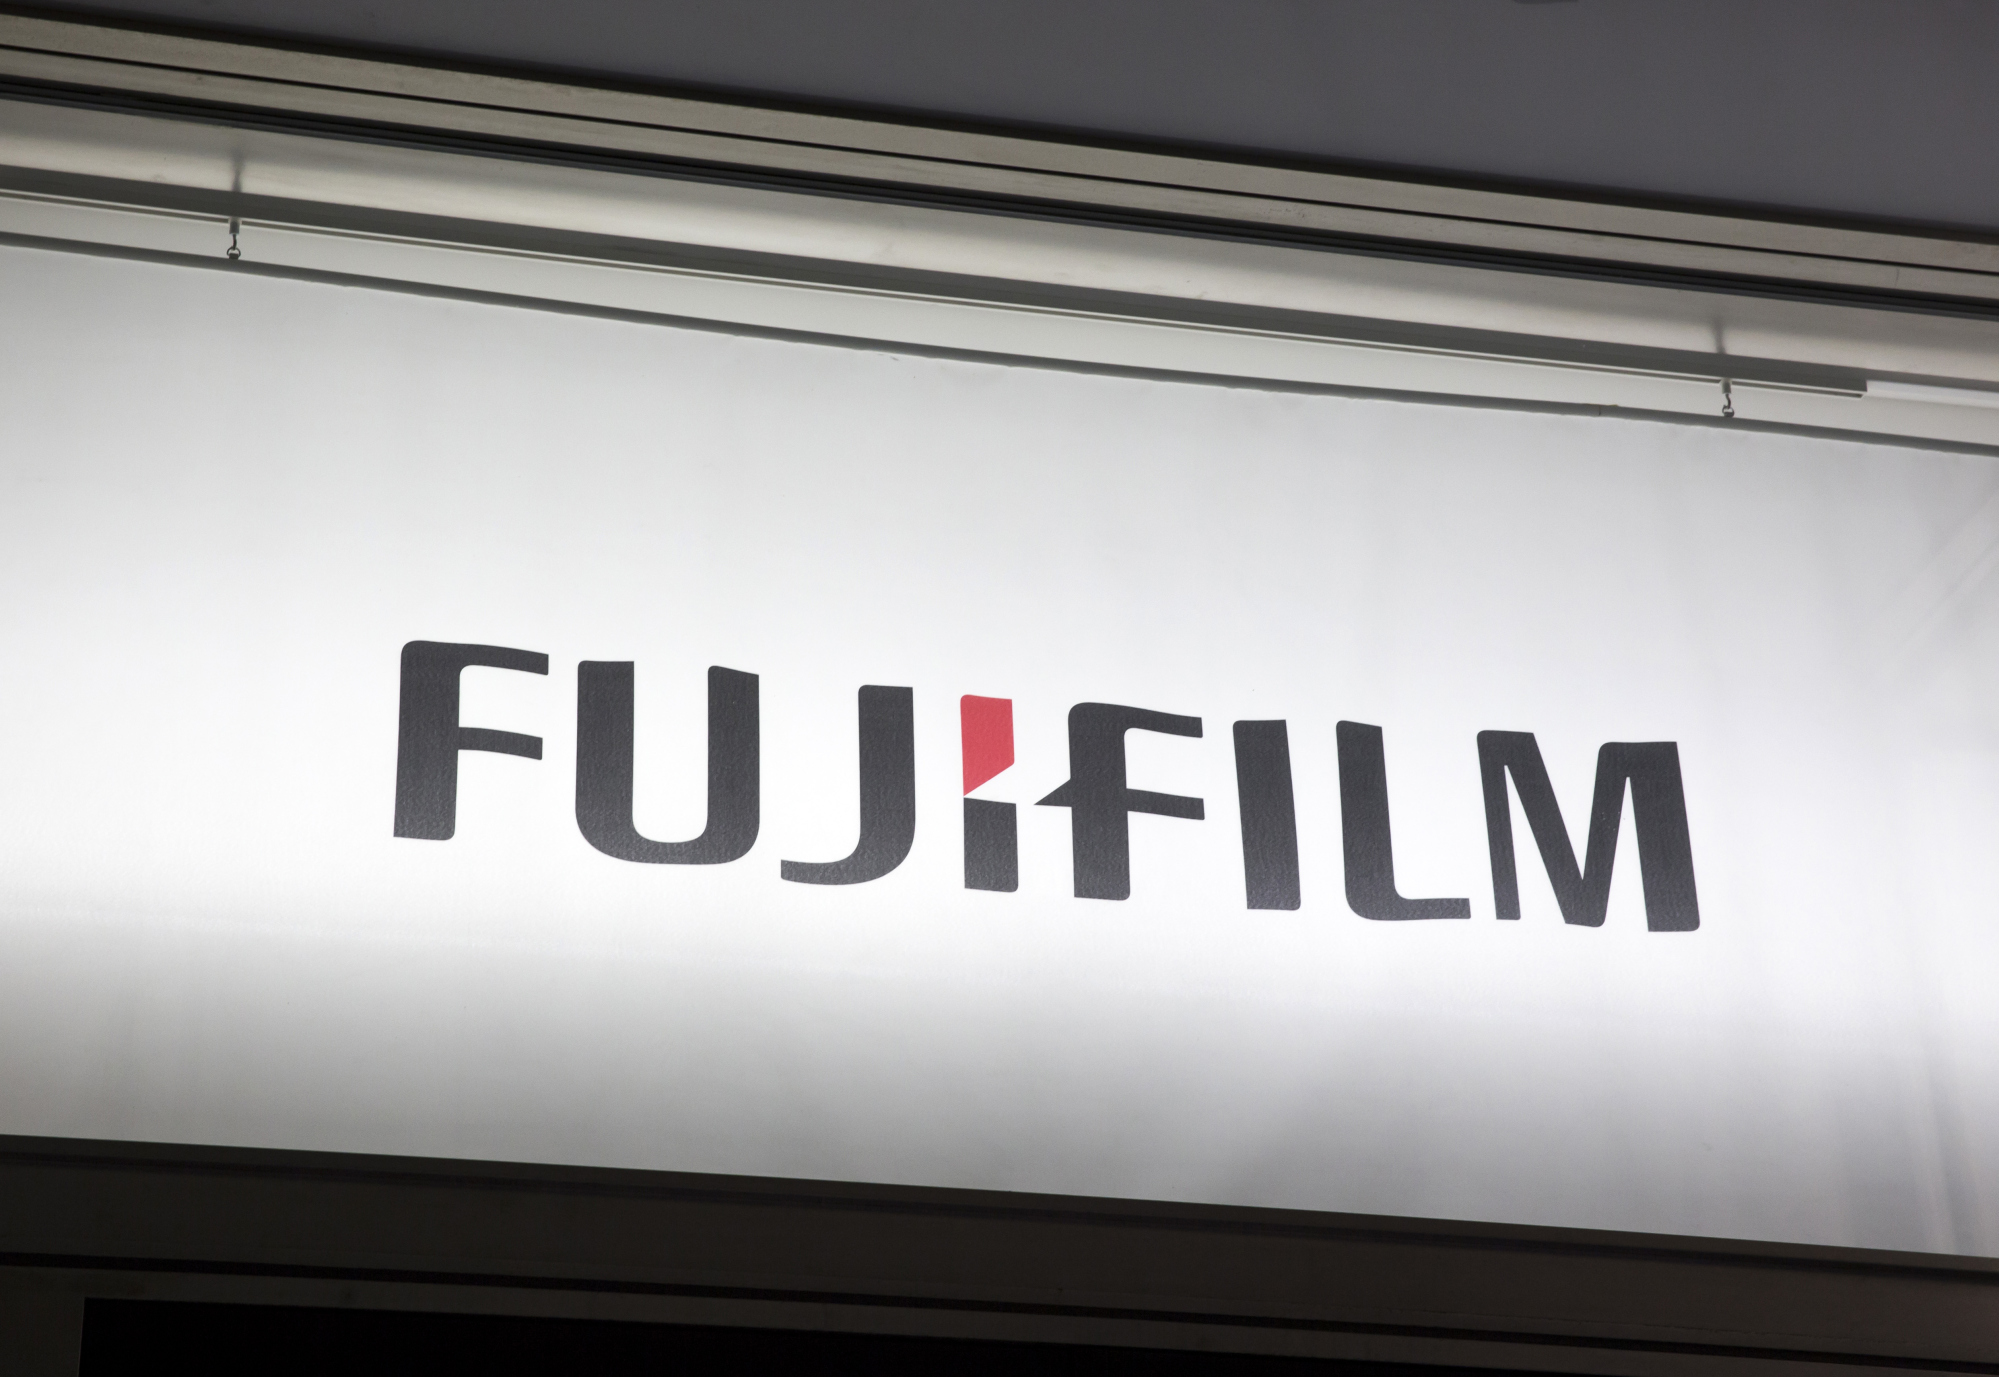 Fujifilm Holdings Logos As The Company Announces A Deal With Xerox Corp.